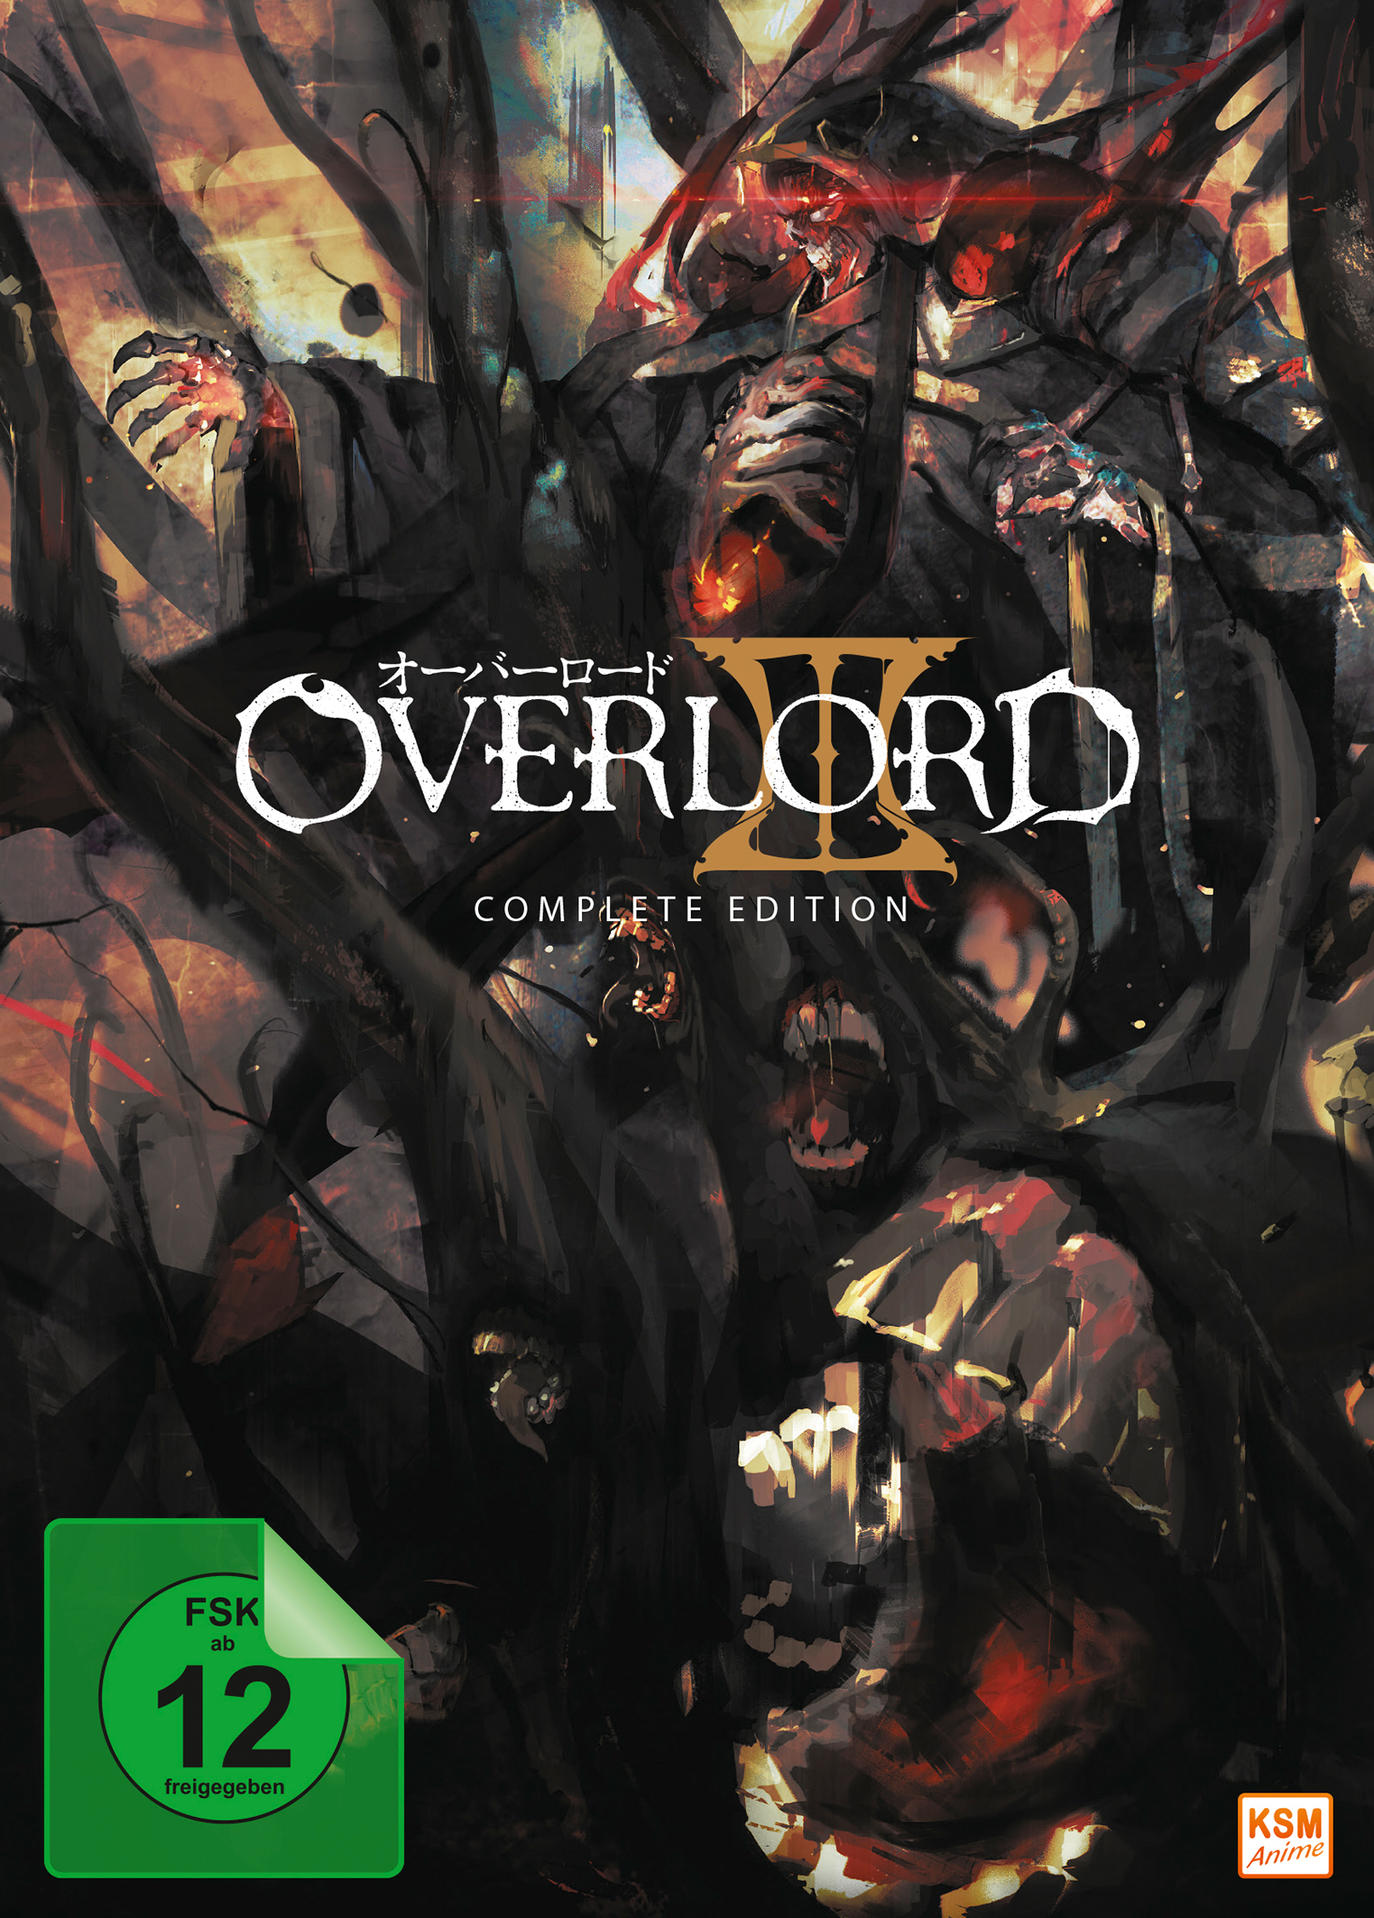 Overlord - Complete Staffel Edition - DVD 3